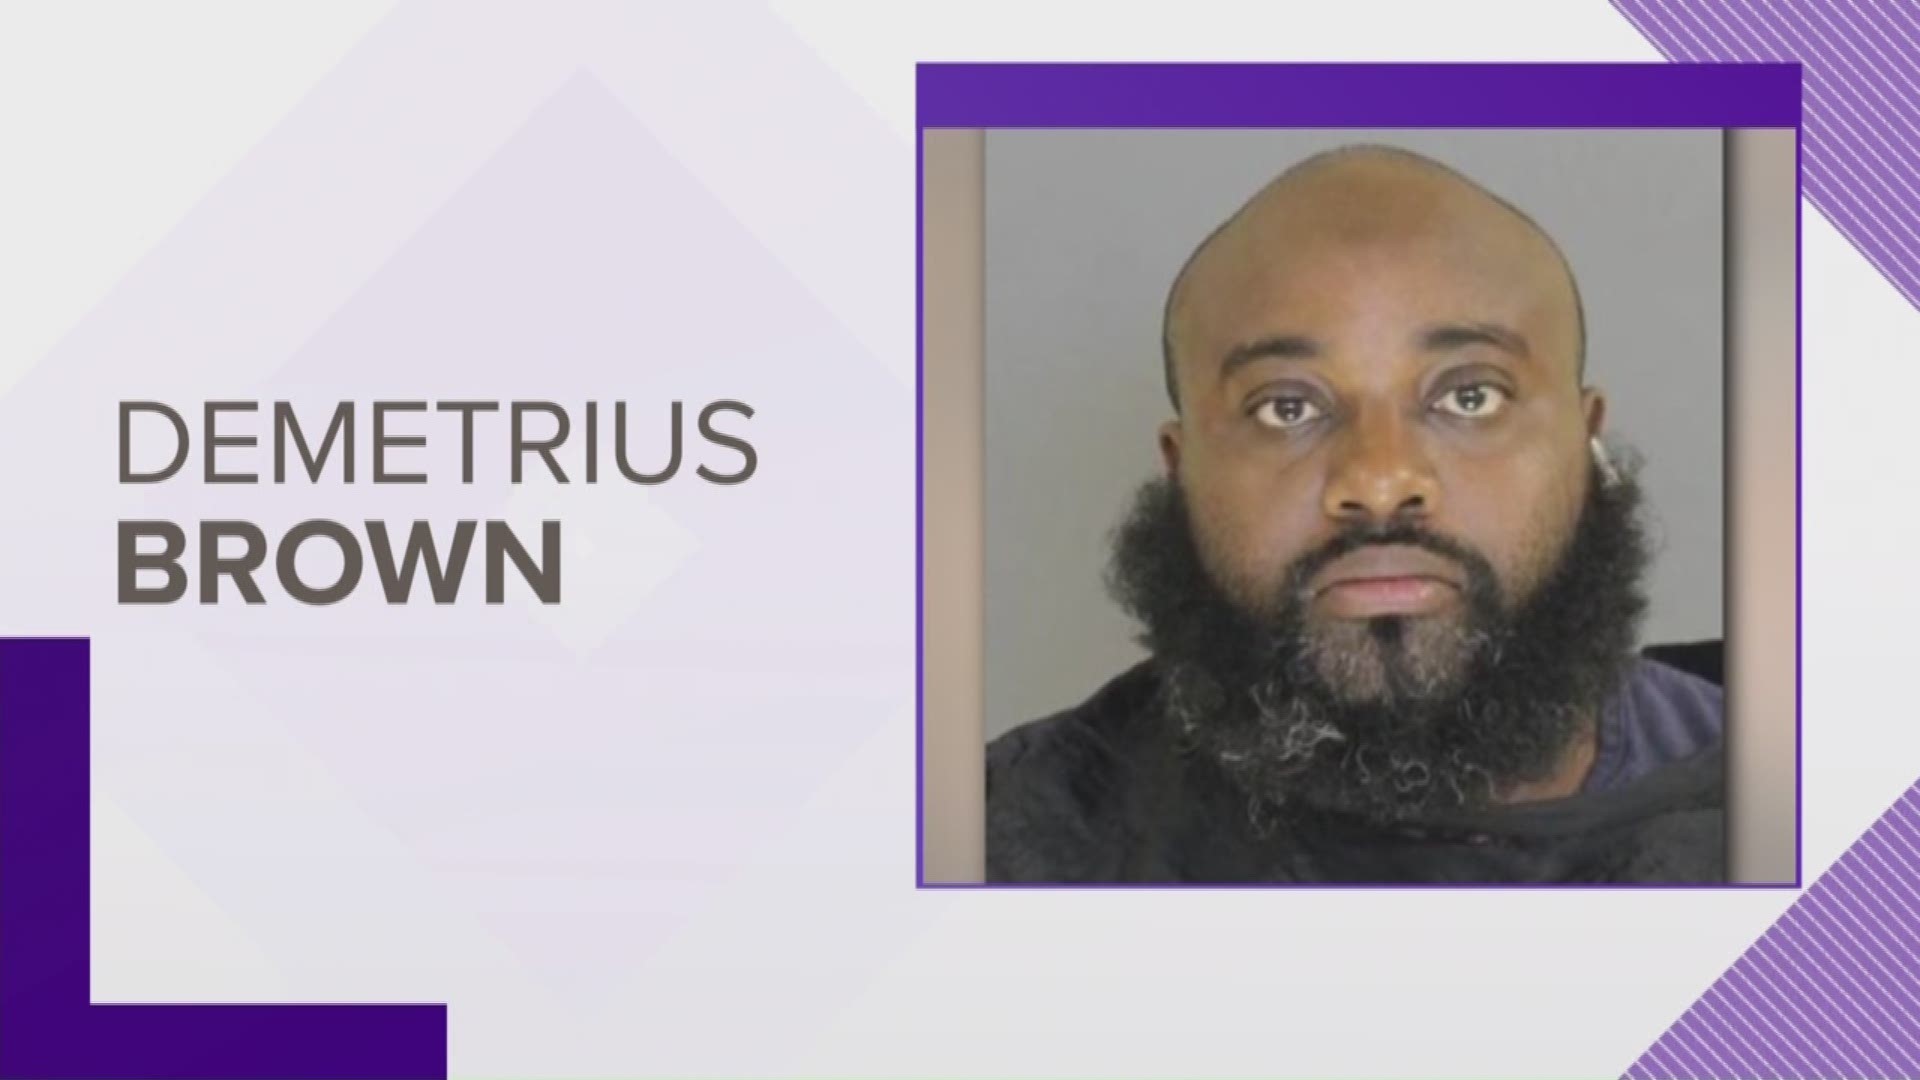 Demetrius Brown is the suspect in the shooting and killing of a man at a Sumter auto shop.